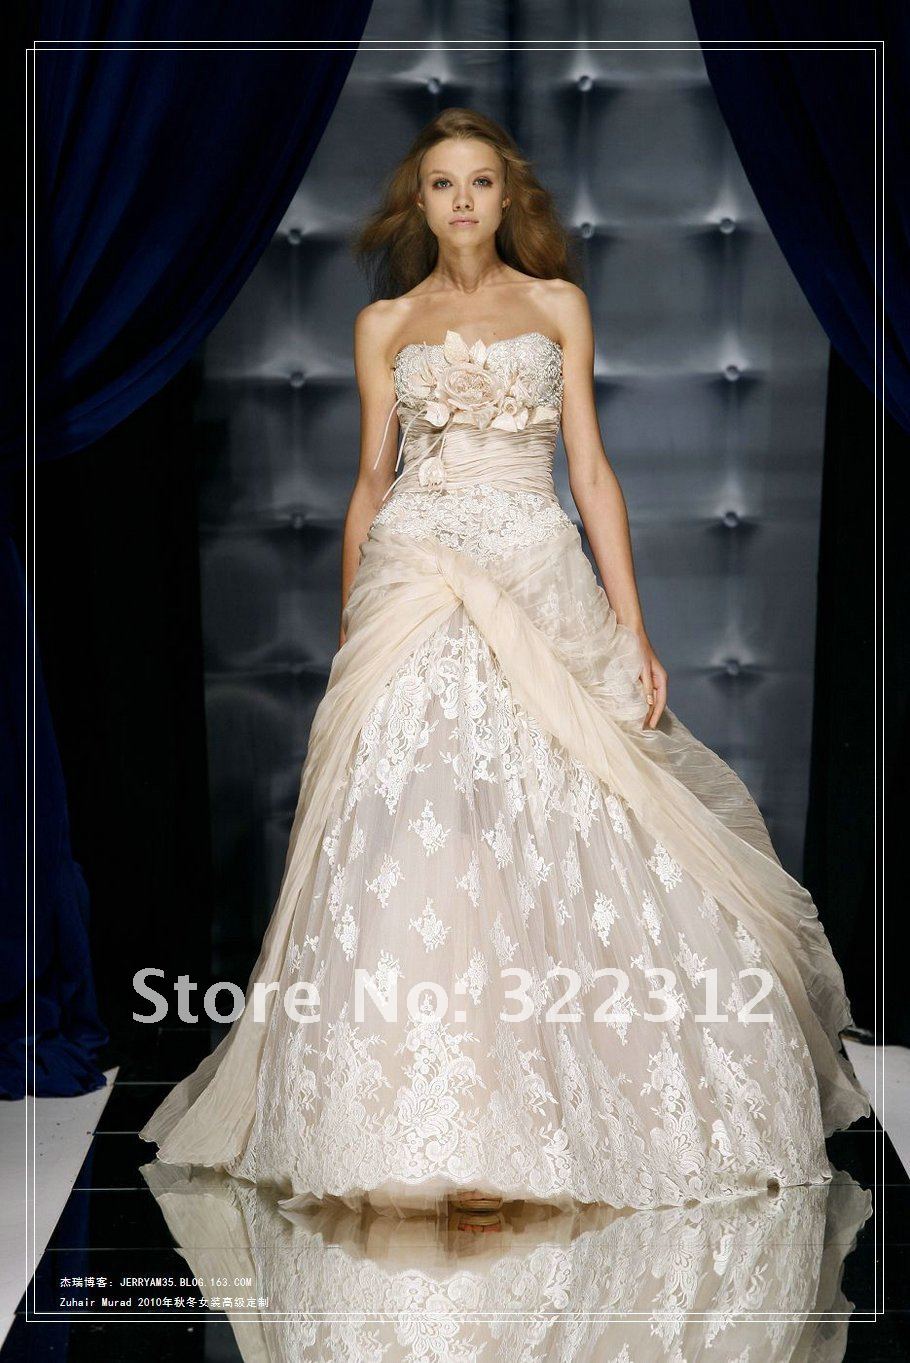 Couture Bridal